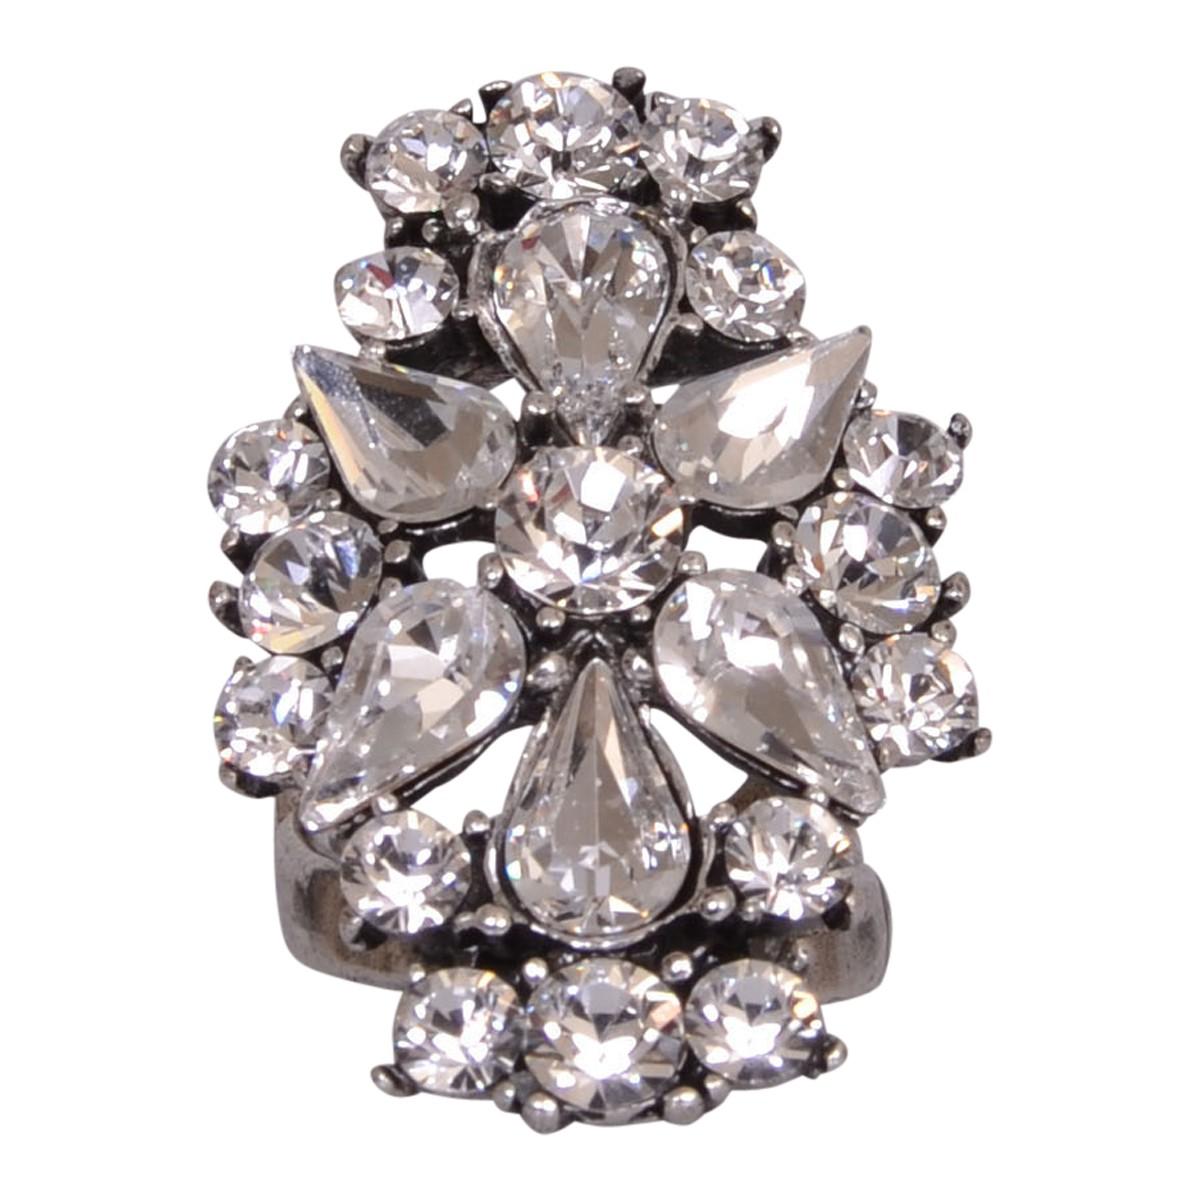 Long Clear Swarovski Crystal Ring. Be the first to review this product